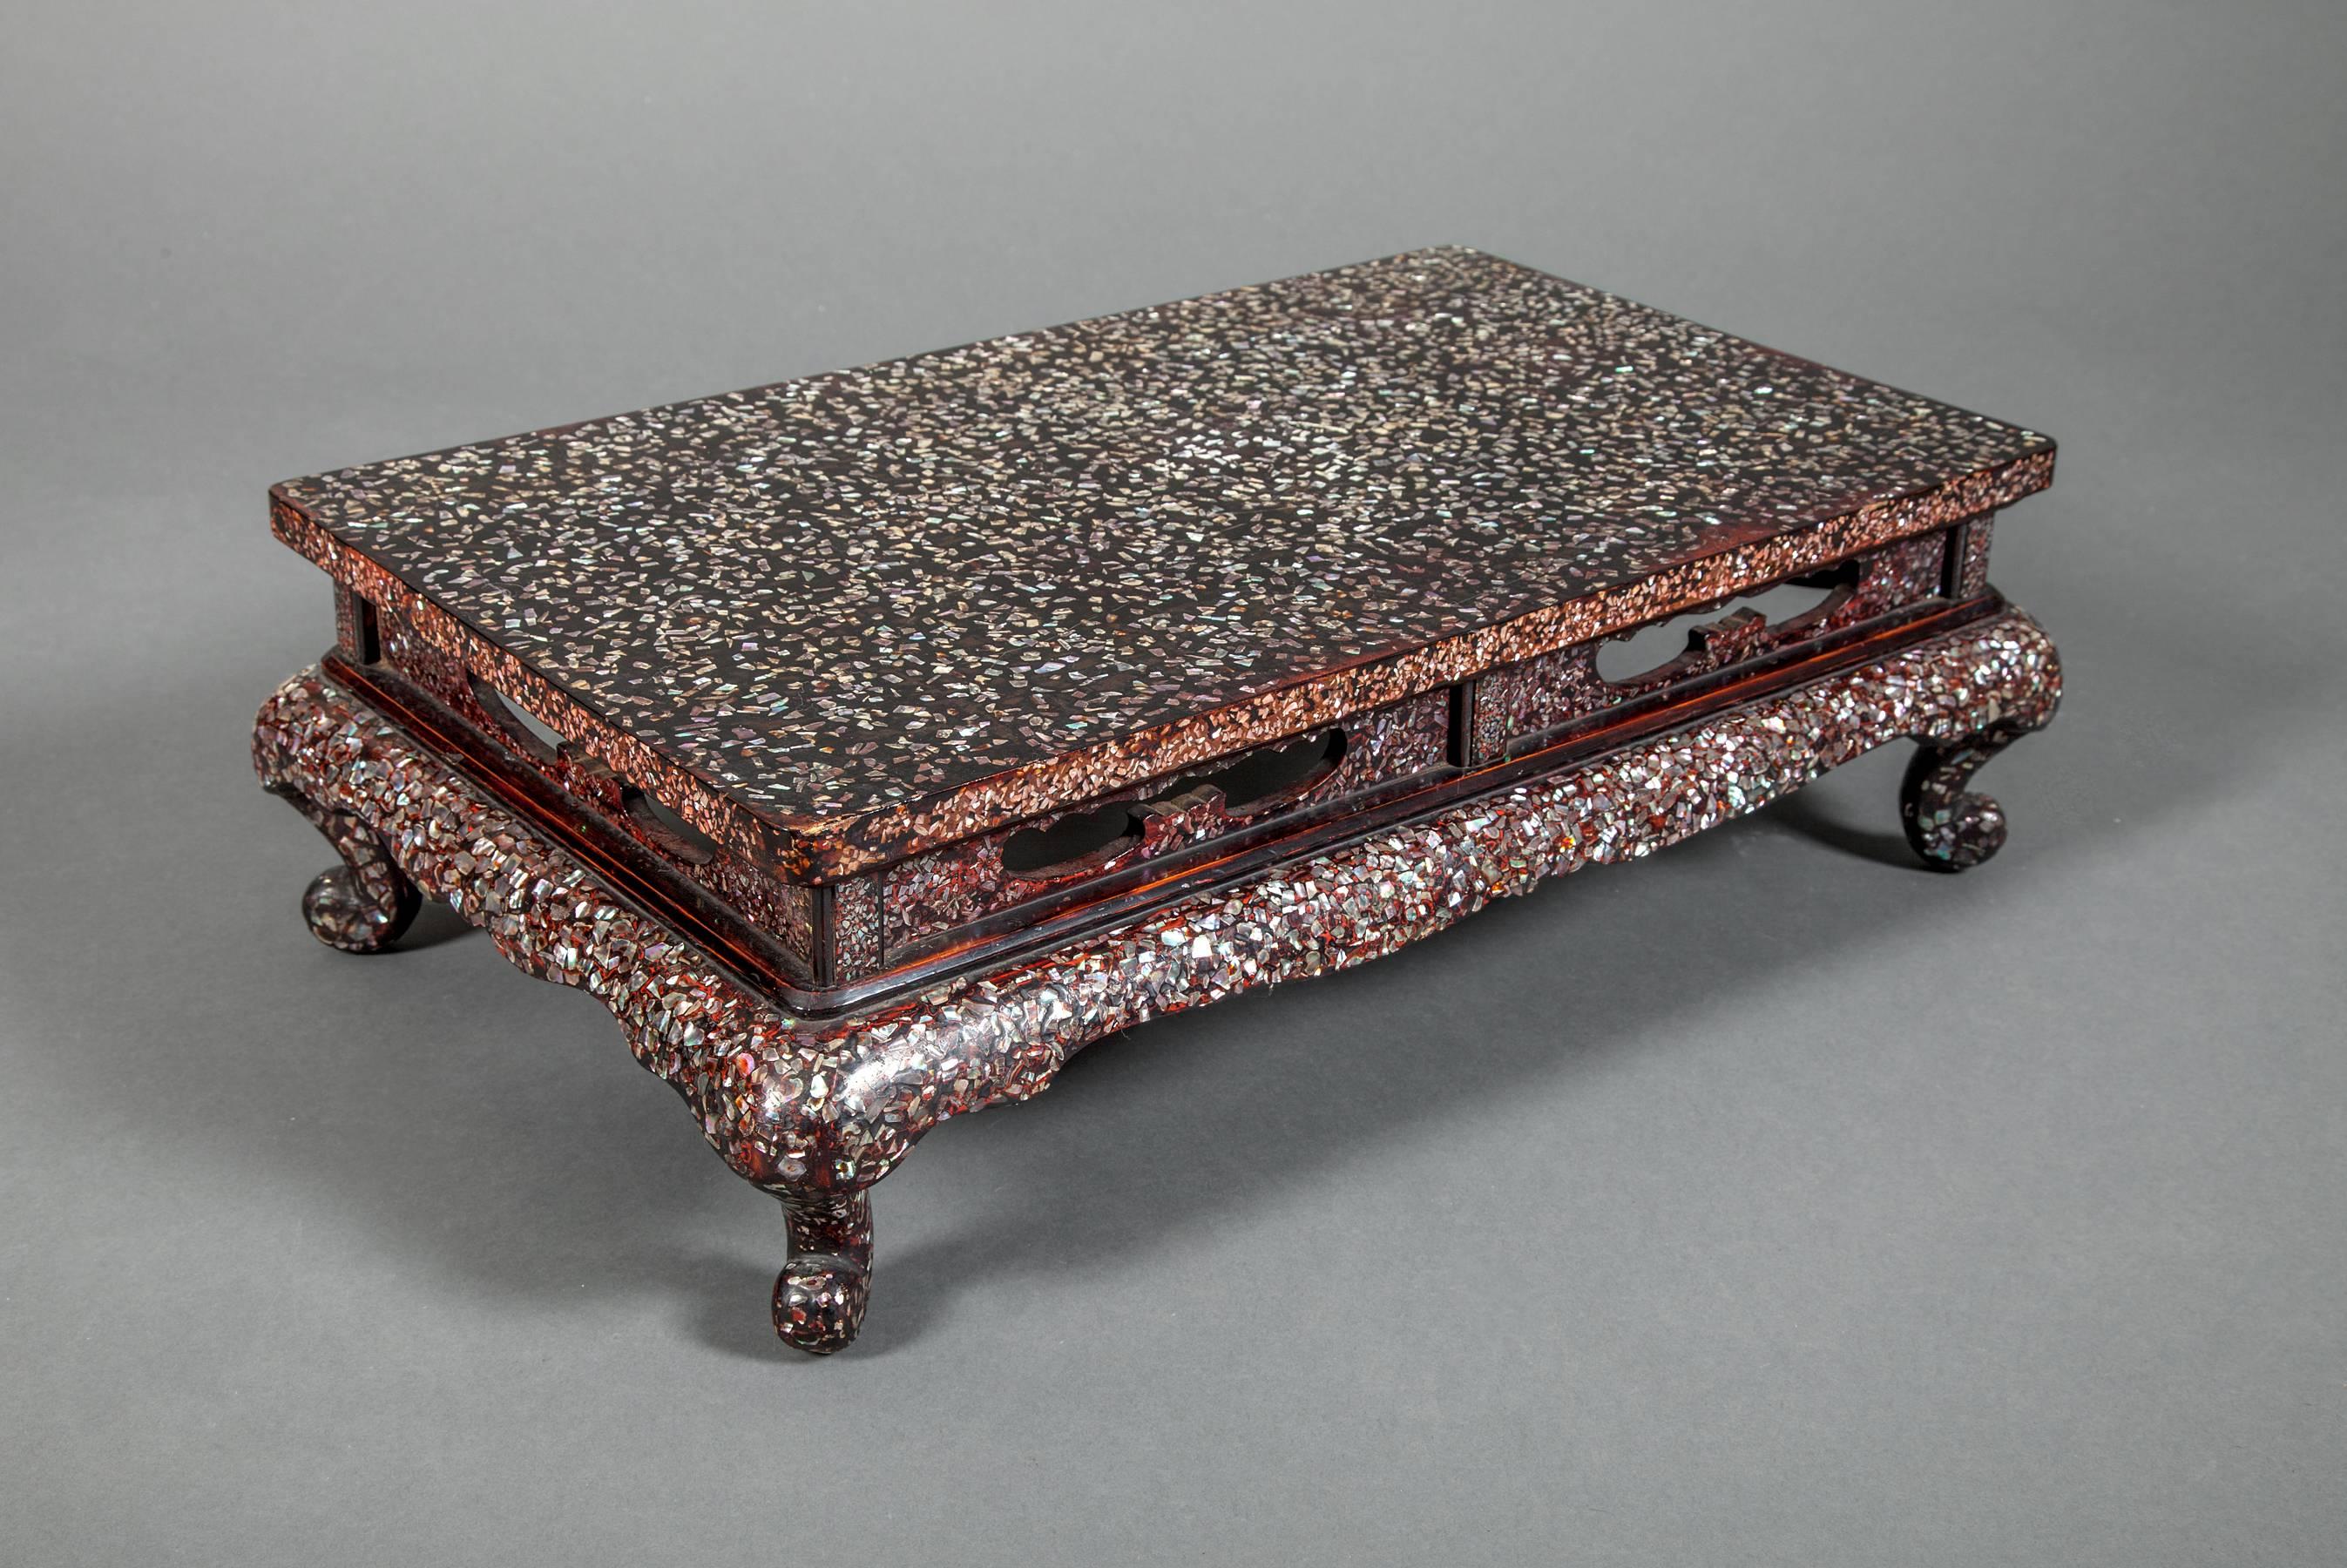 Japanese lacquered wood table
(in Chinese style) with m.o.p. inlay.